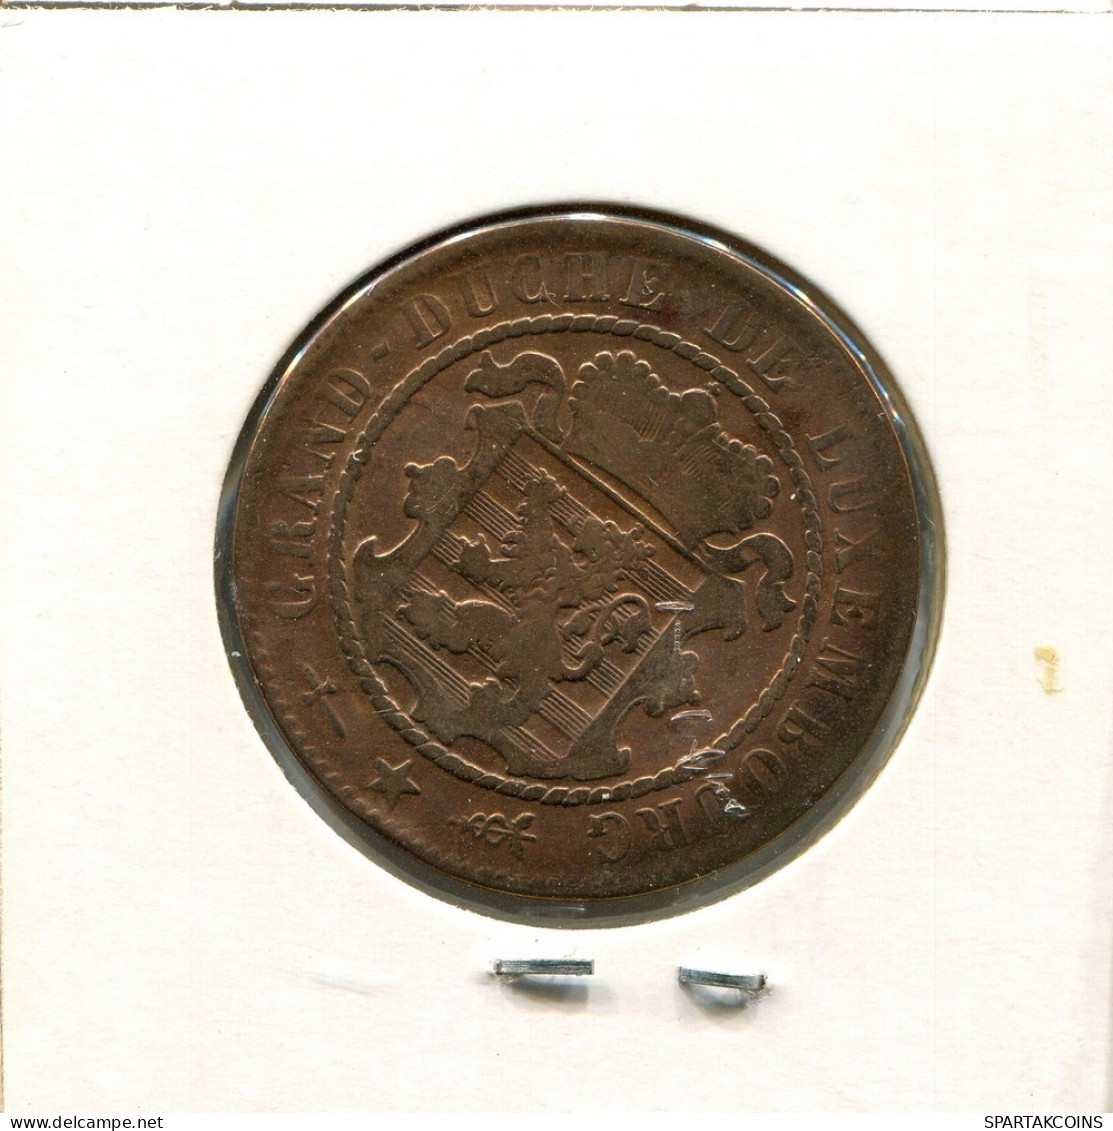 10 CENTIMES 1870 LUXEMBURG LUXEMBOURG Münze #AT180.D.A - Luxemburgo